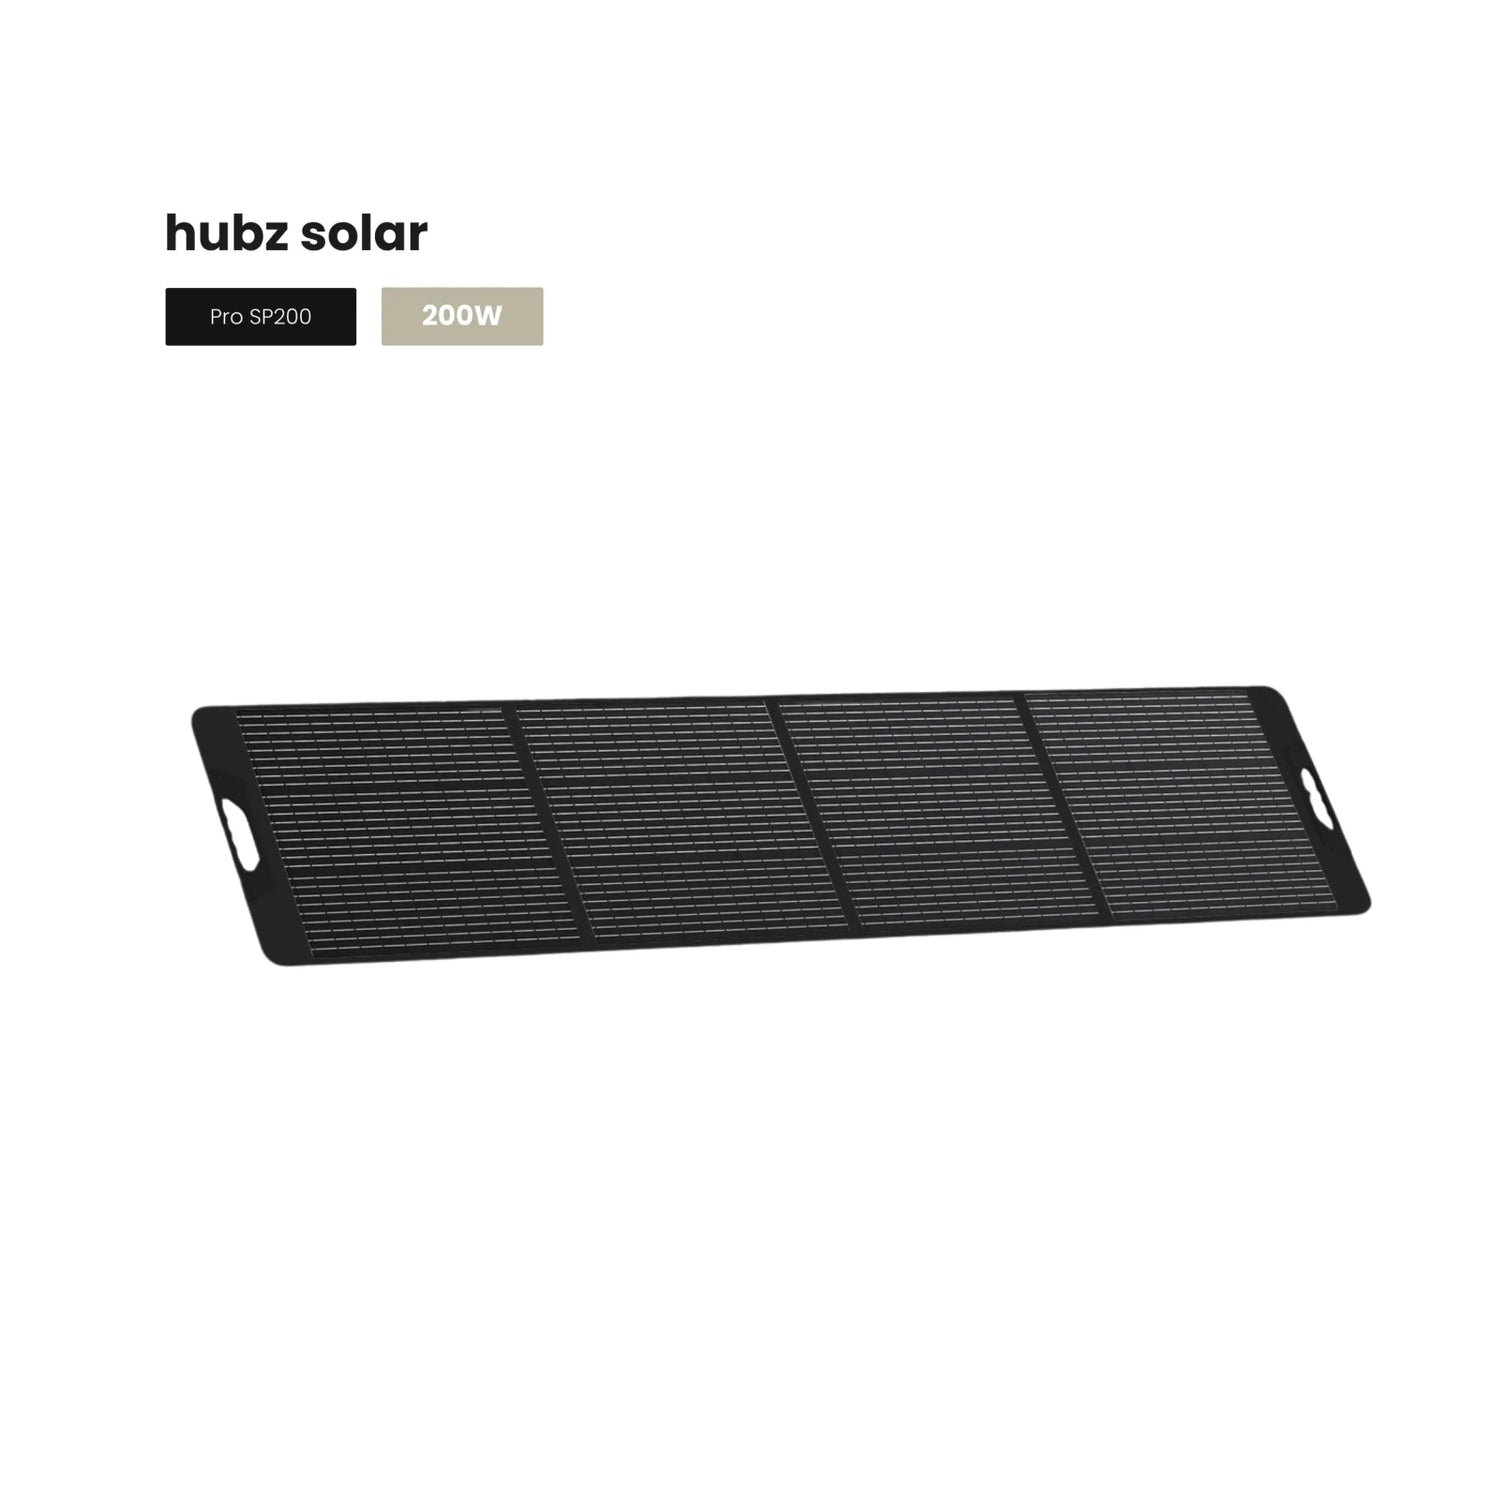 200w portable solar panel by hubz power for hubz portable power stations.